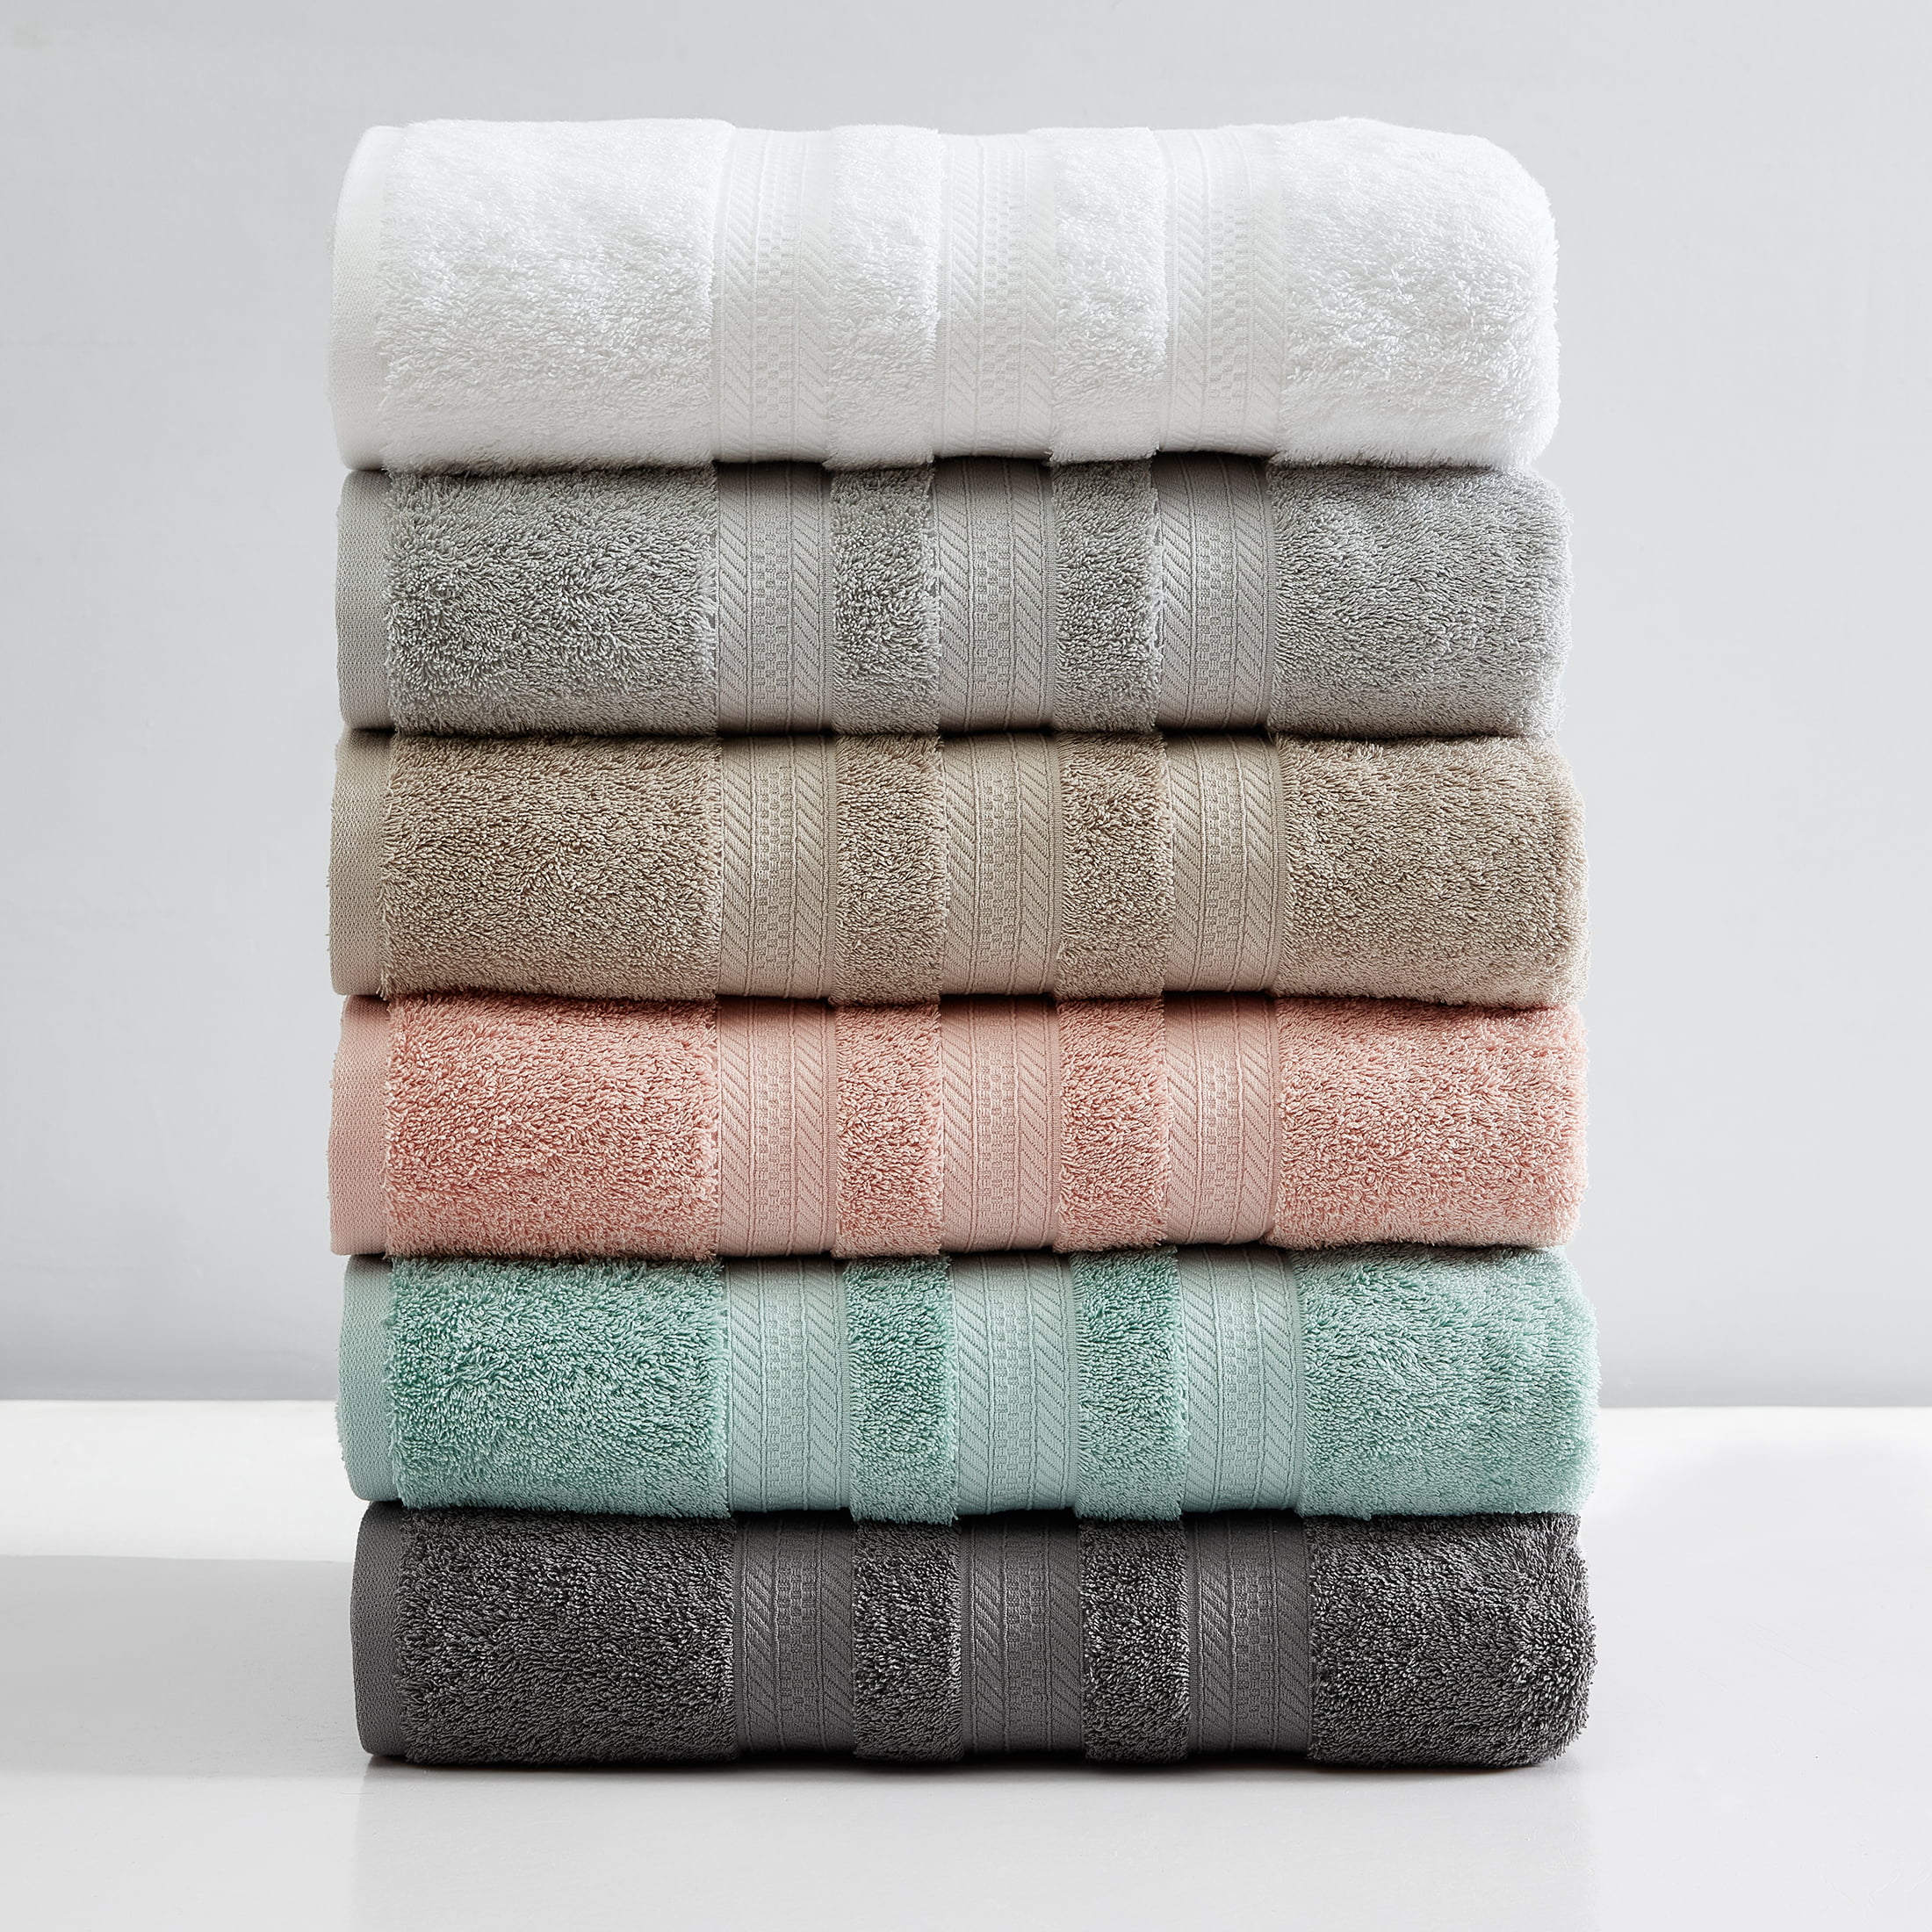 Large 100% Cotton Bath Towels Super Large Soft High Absorption And